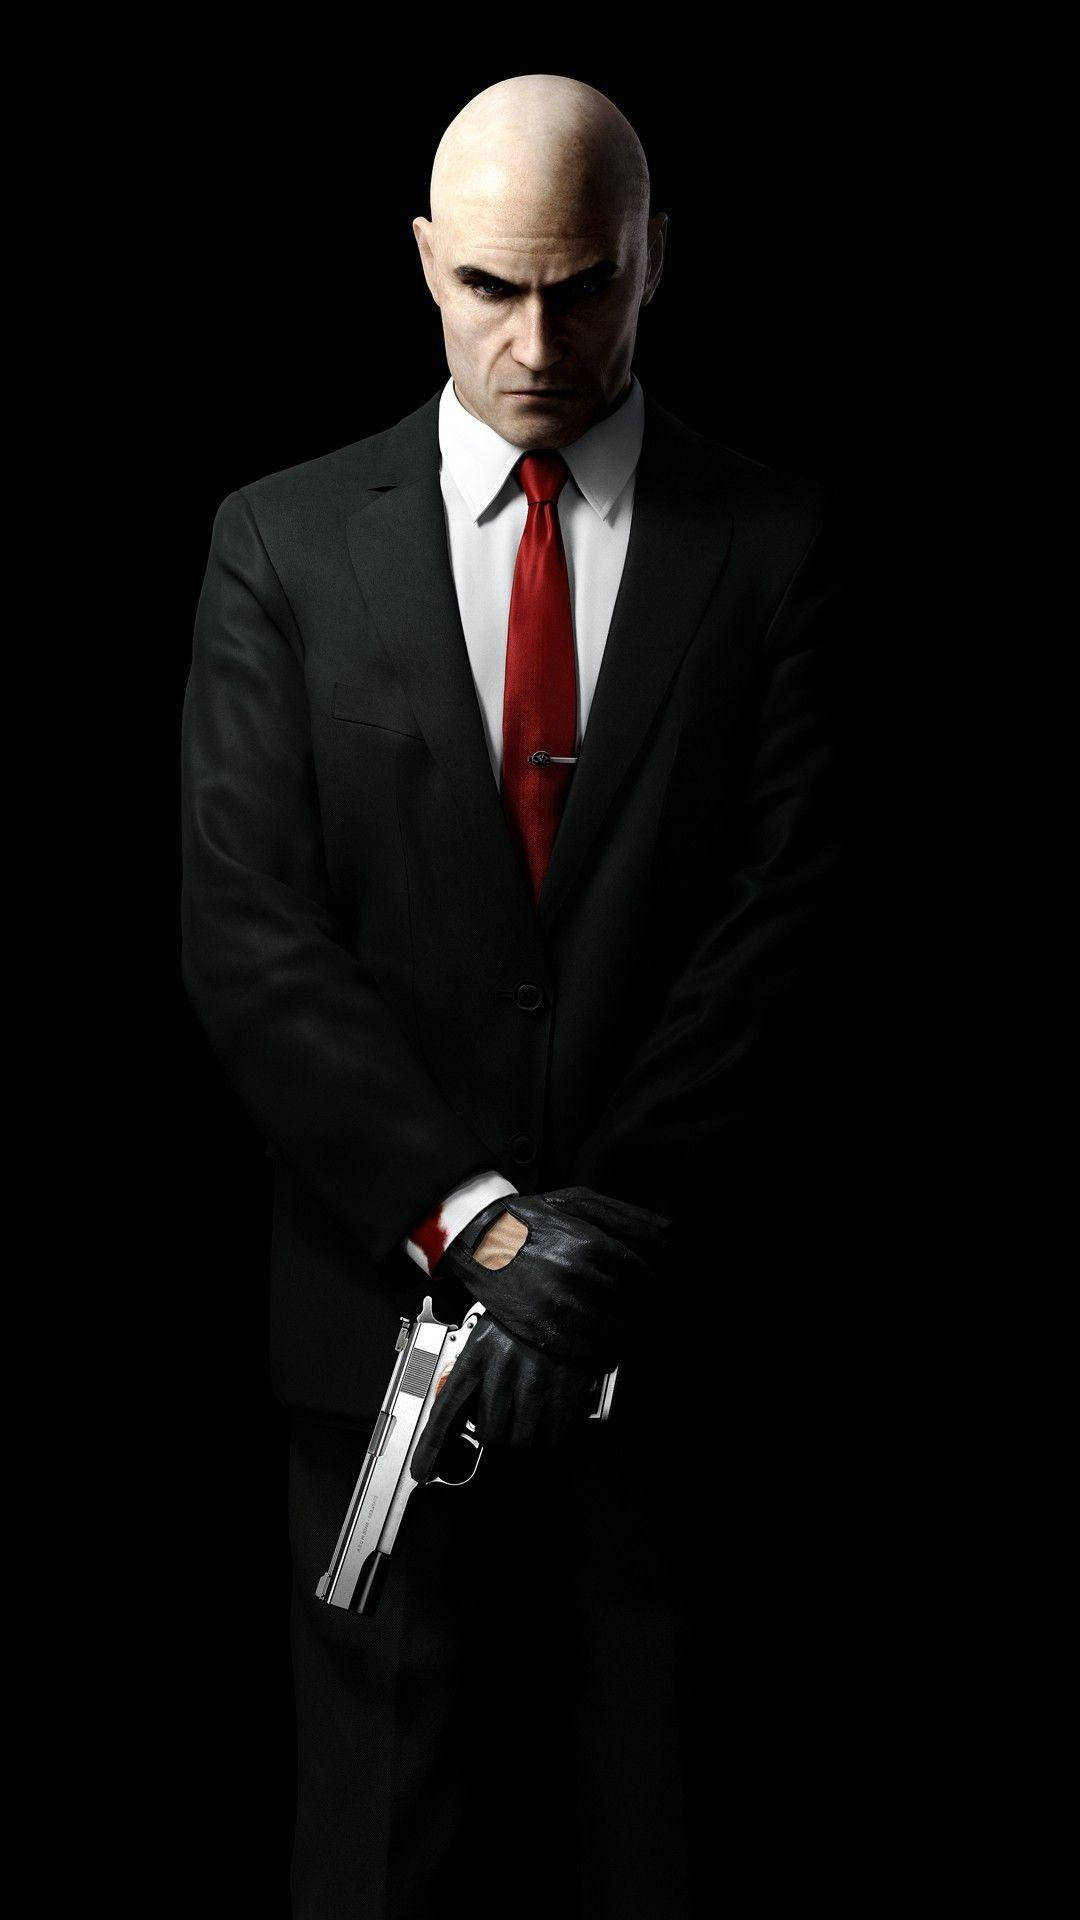 A Man In A Suit And Tie Holding A Gun Wallpaper